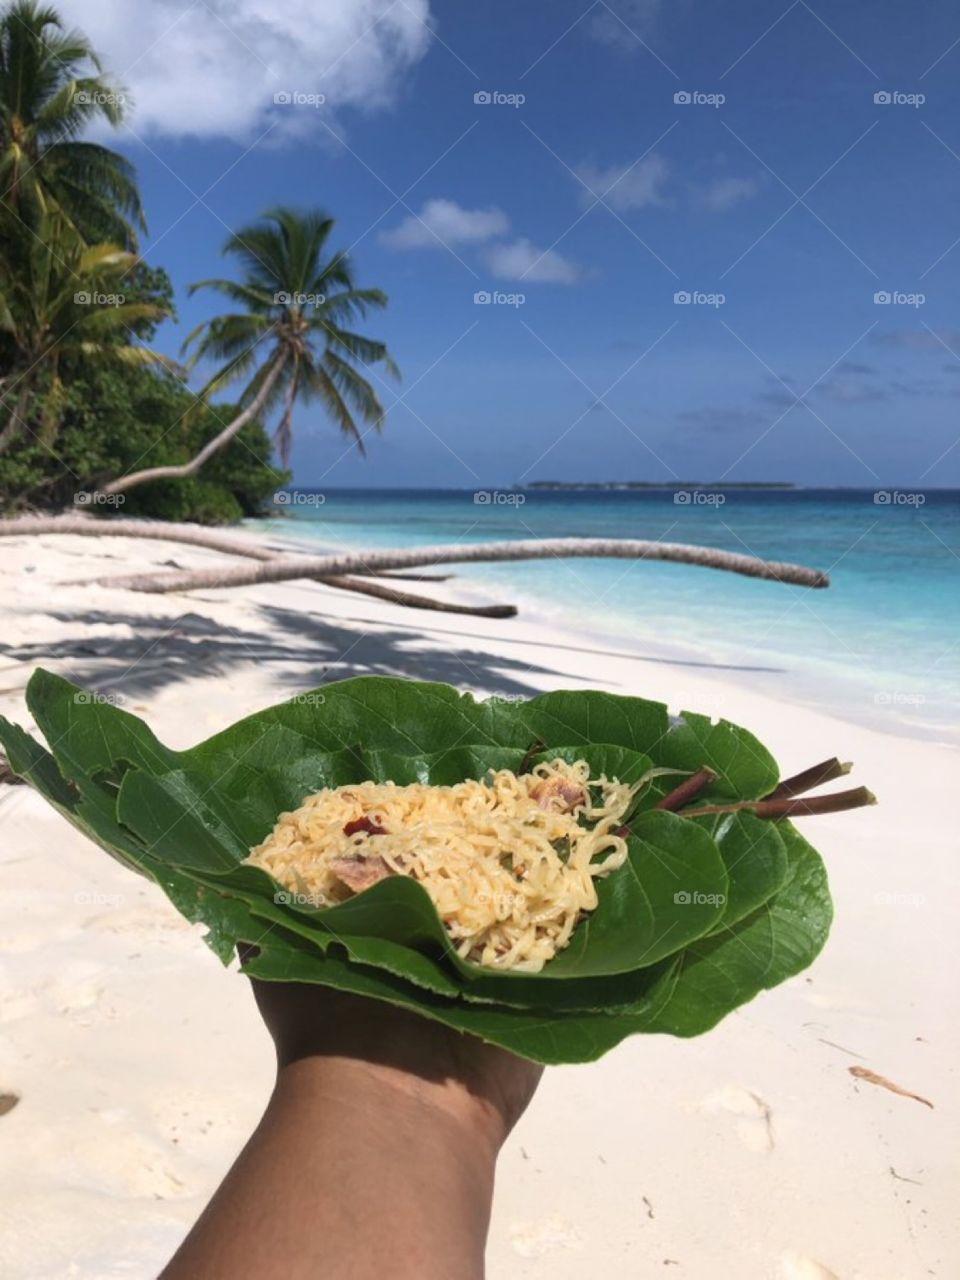 Tasty home made noodles on a leave used as plates during fun trips activities on a nice beach full of white sand, crystal clear lagoon.